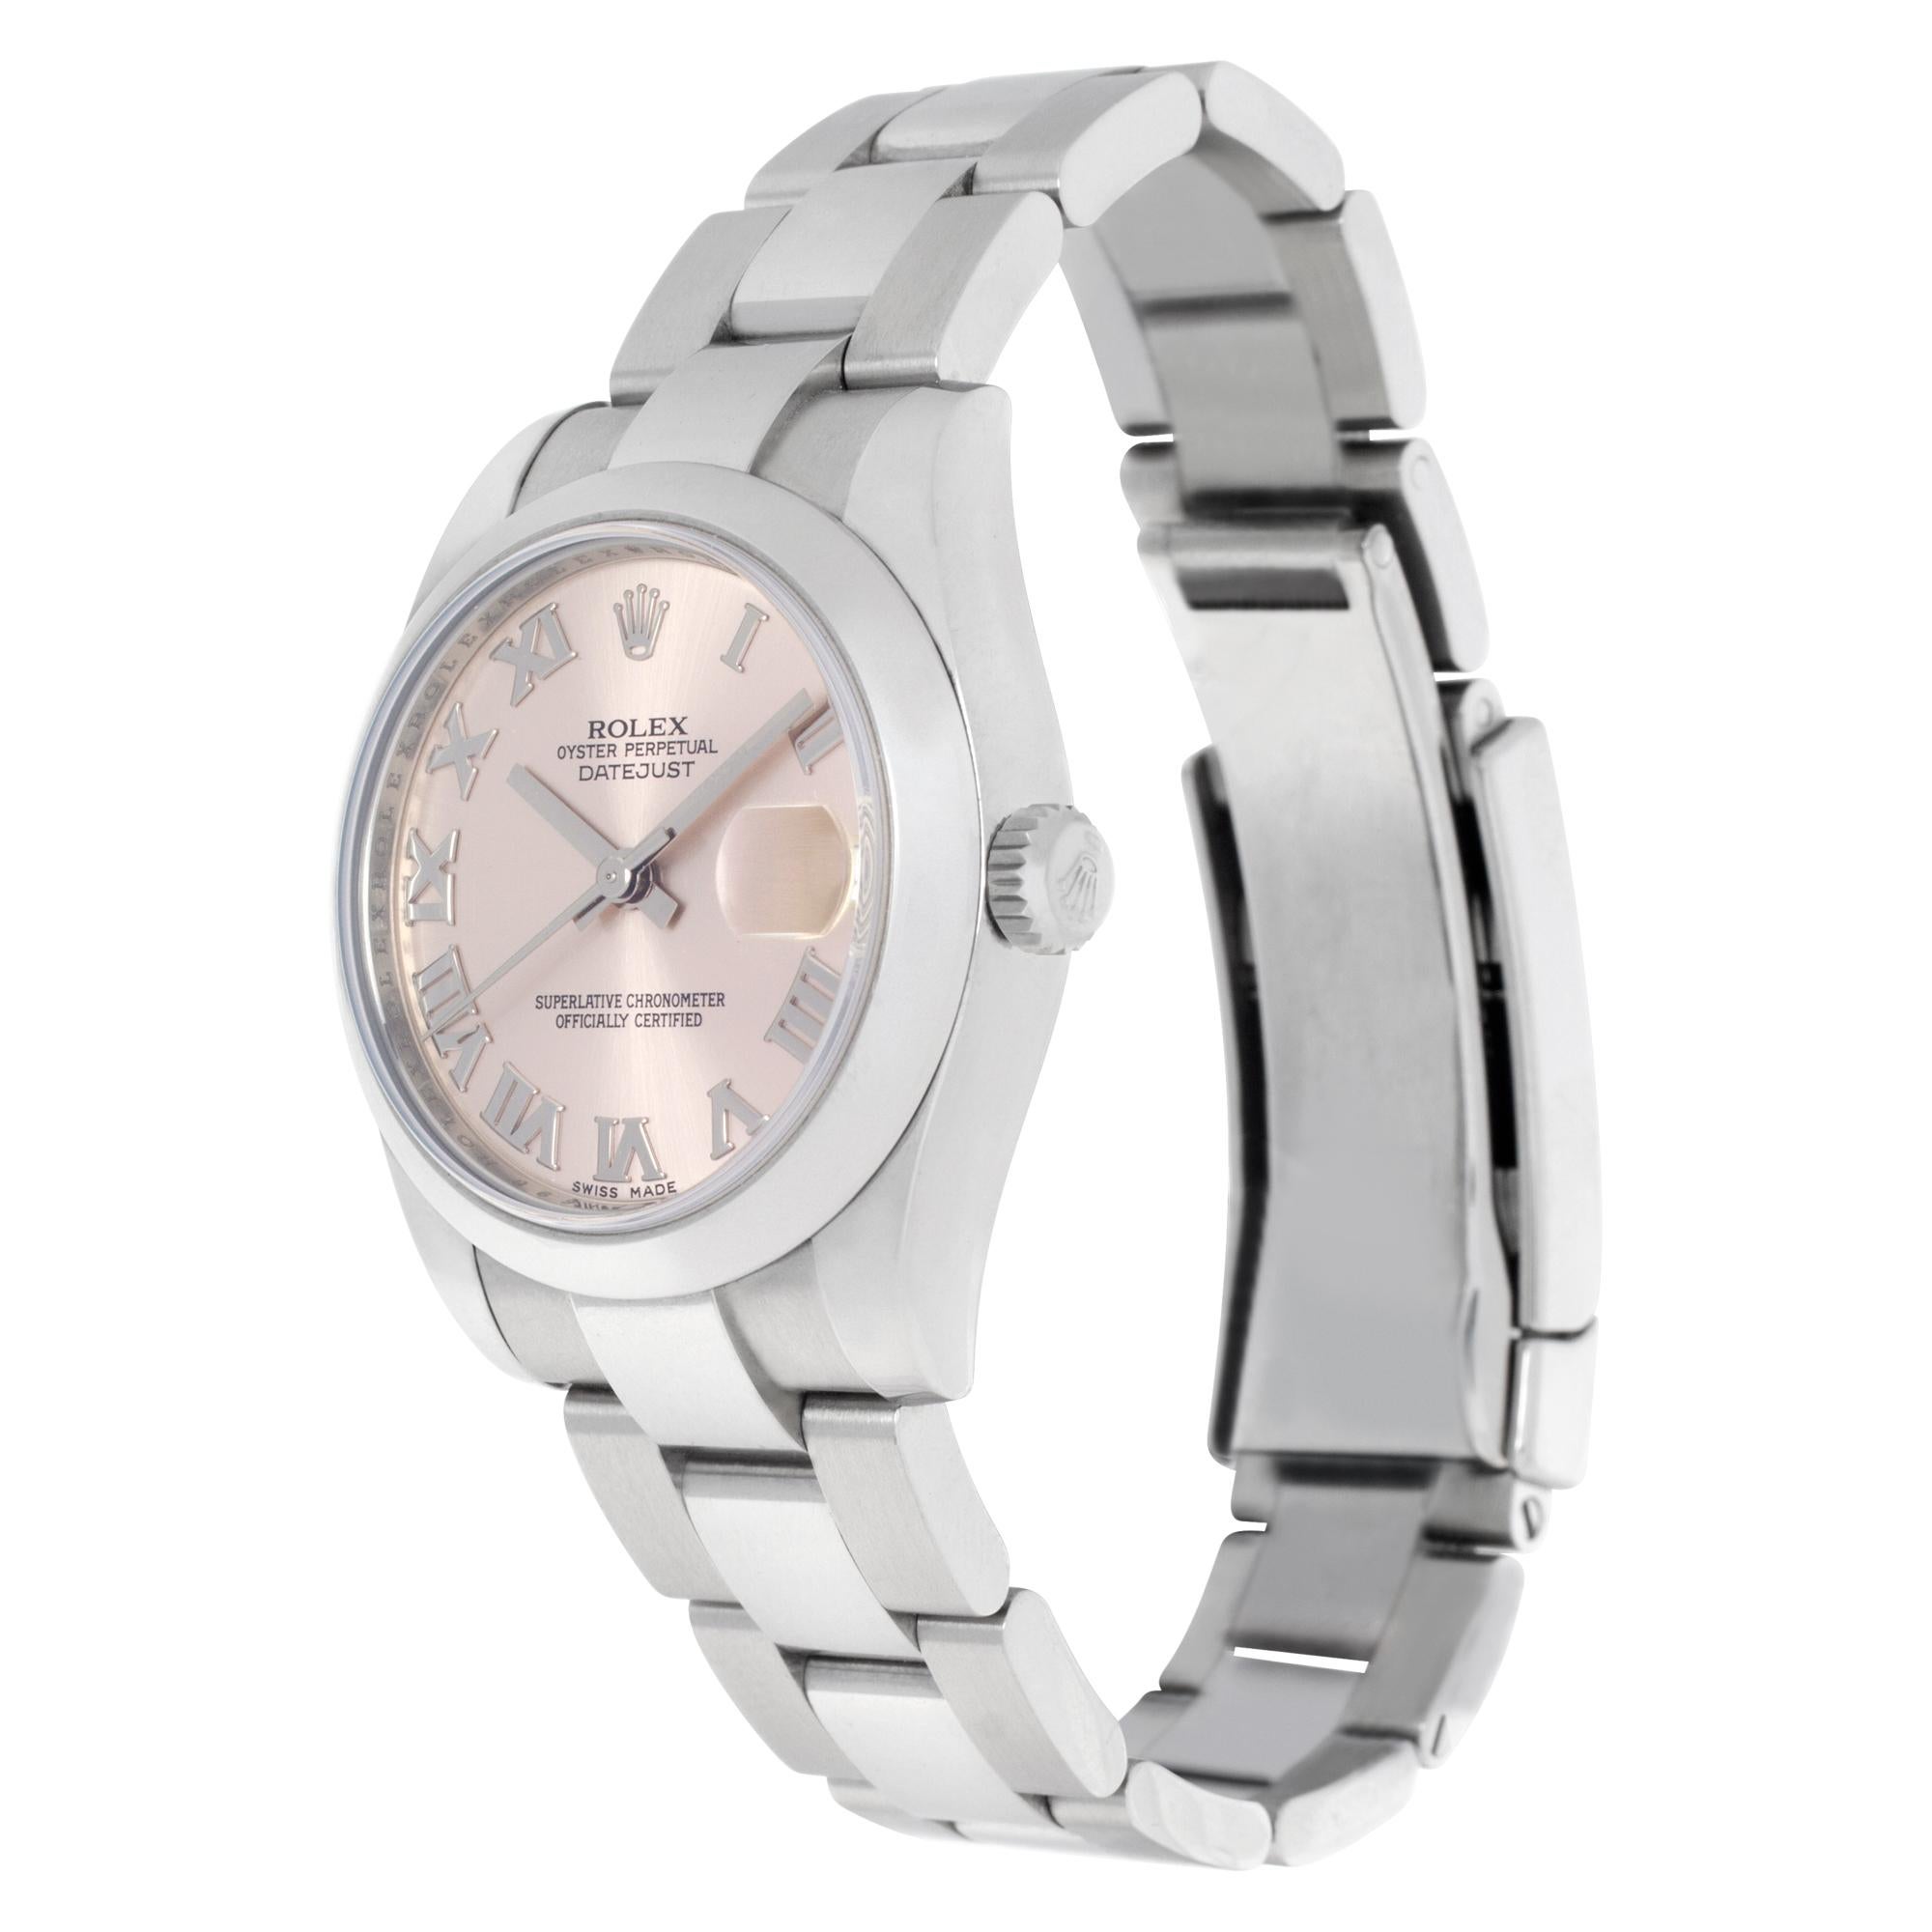 Rolex Datejust in stainless steel with pink dial with white gold applied Roman numeral hour markers. Auto w/ sweep seconds and date. 31 mm case size. With box and papers.  Ref 178240. Circa 2014. Fine Pre-owned Rolex Watch.

Certified preowned